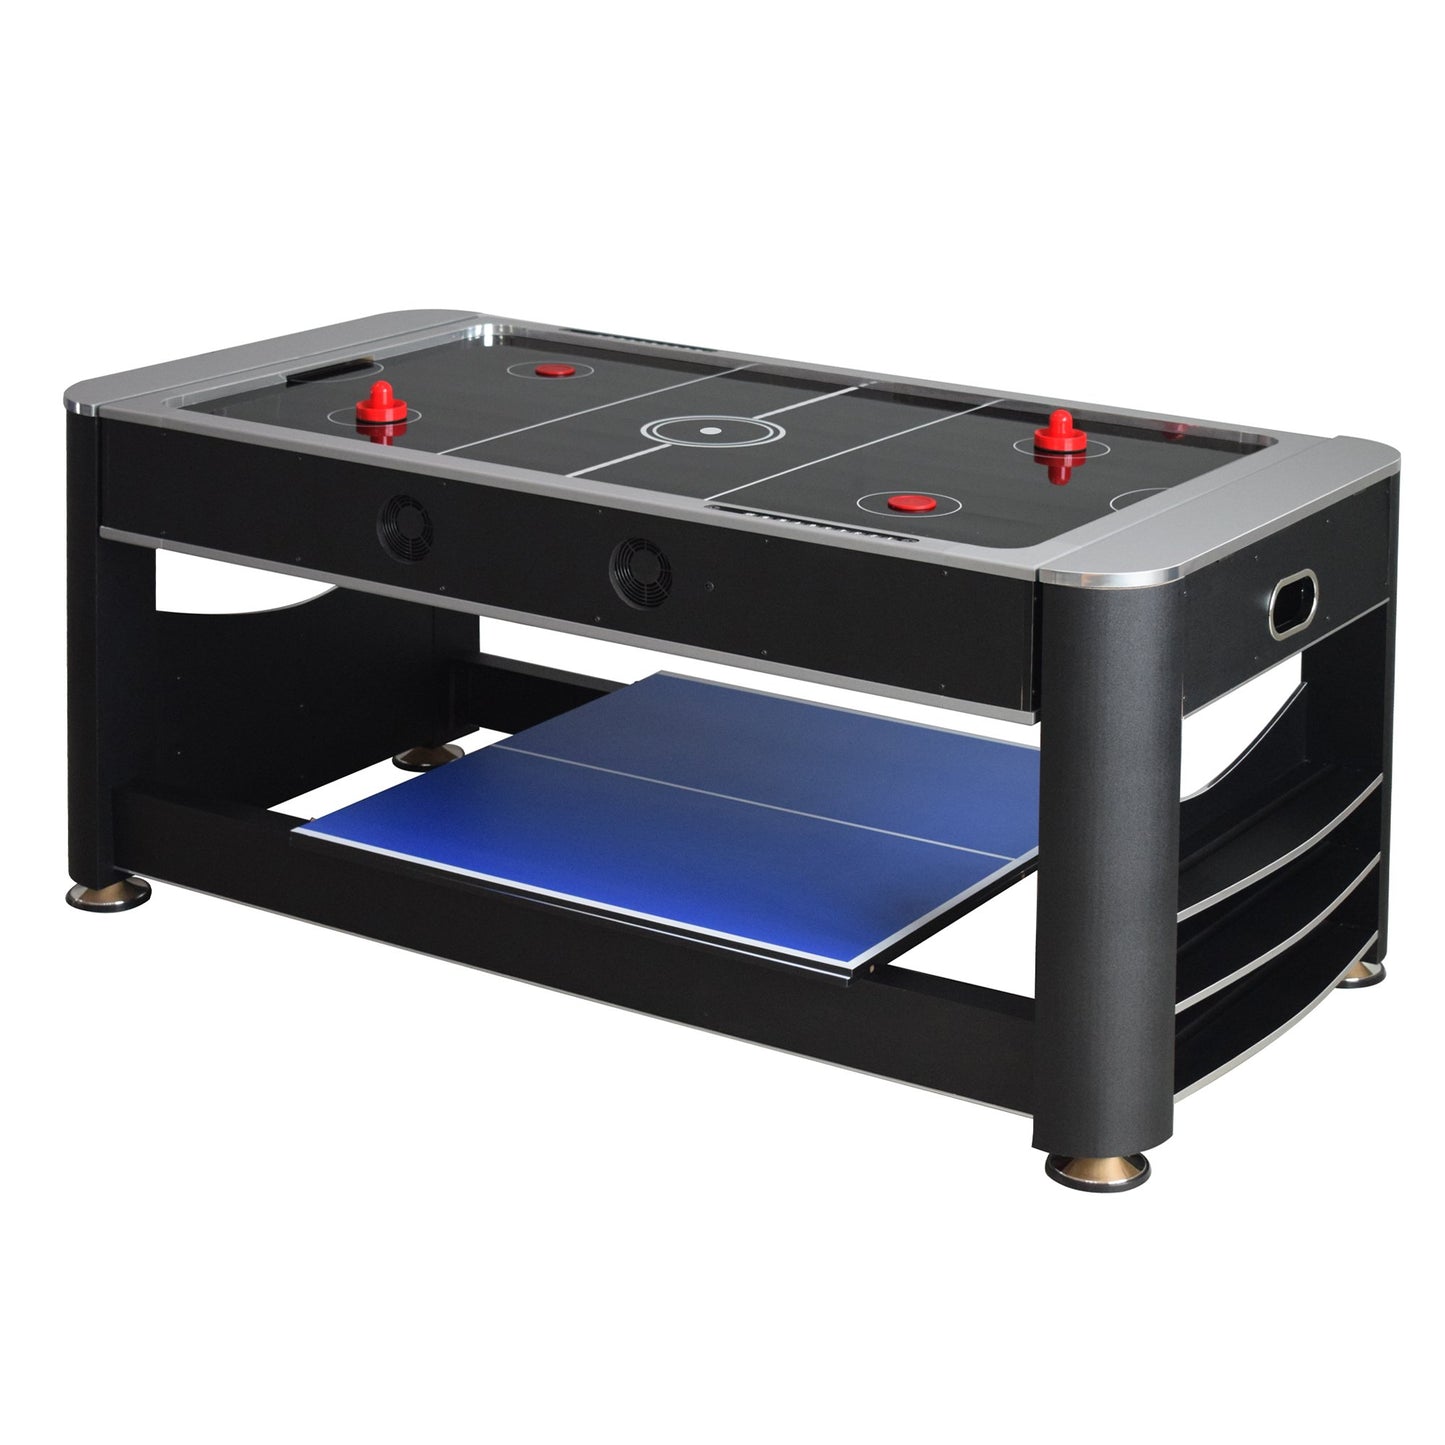 Hathaway Triple Threat 3 in 1 Multi Game Table 6ft - Gaming Blaze